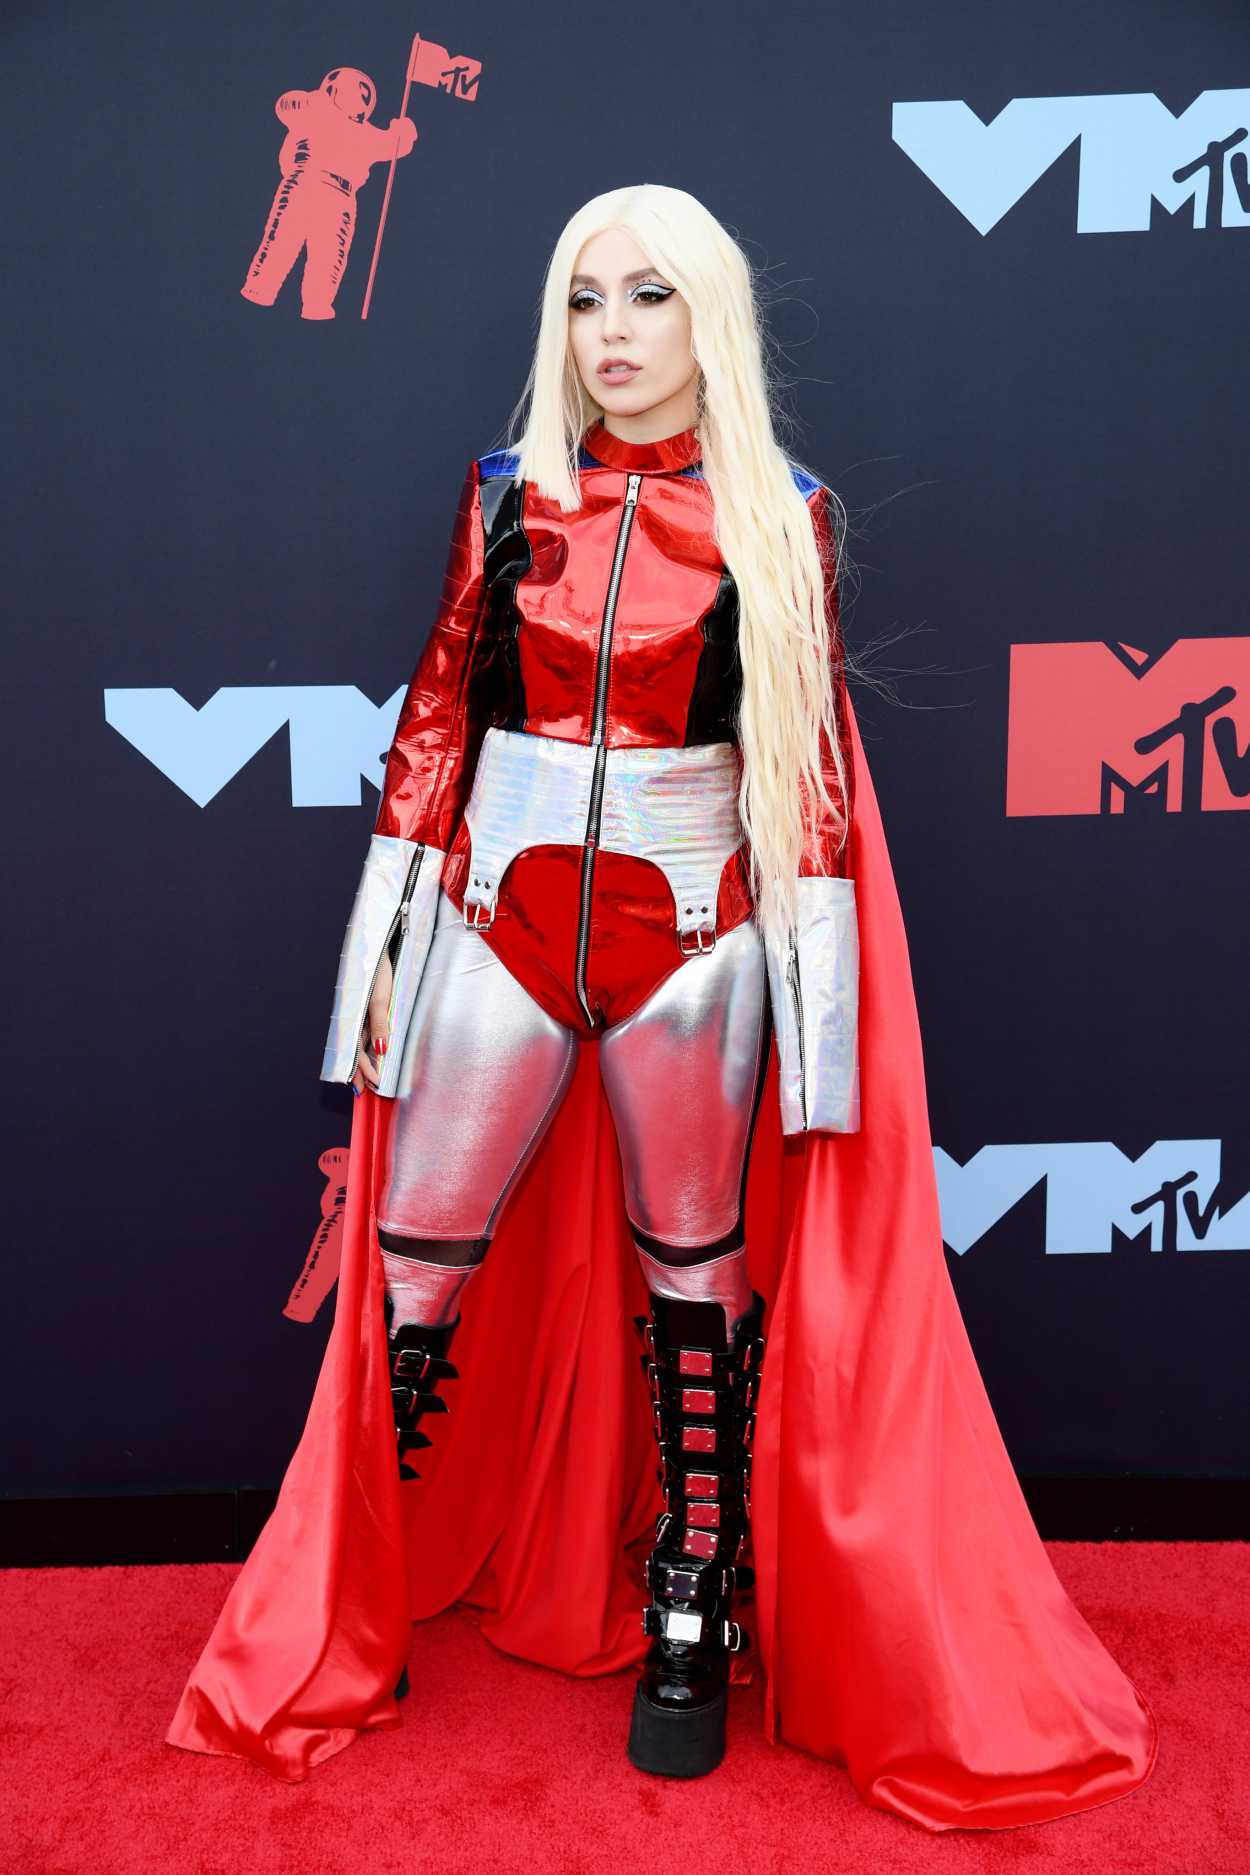 Ava Max Attends The 2019 Mtv Video Music Awards At Prudential Center In New Jersey 08262019 